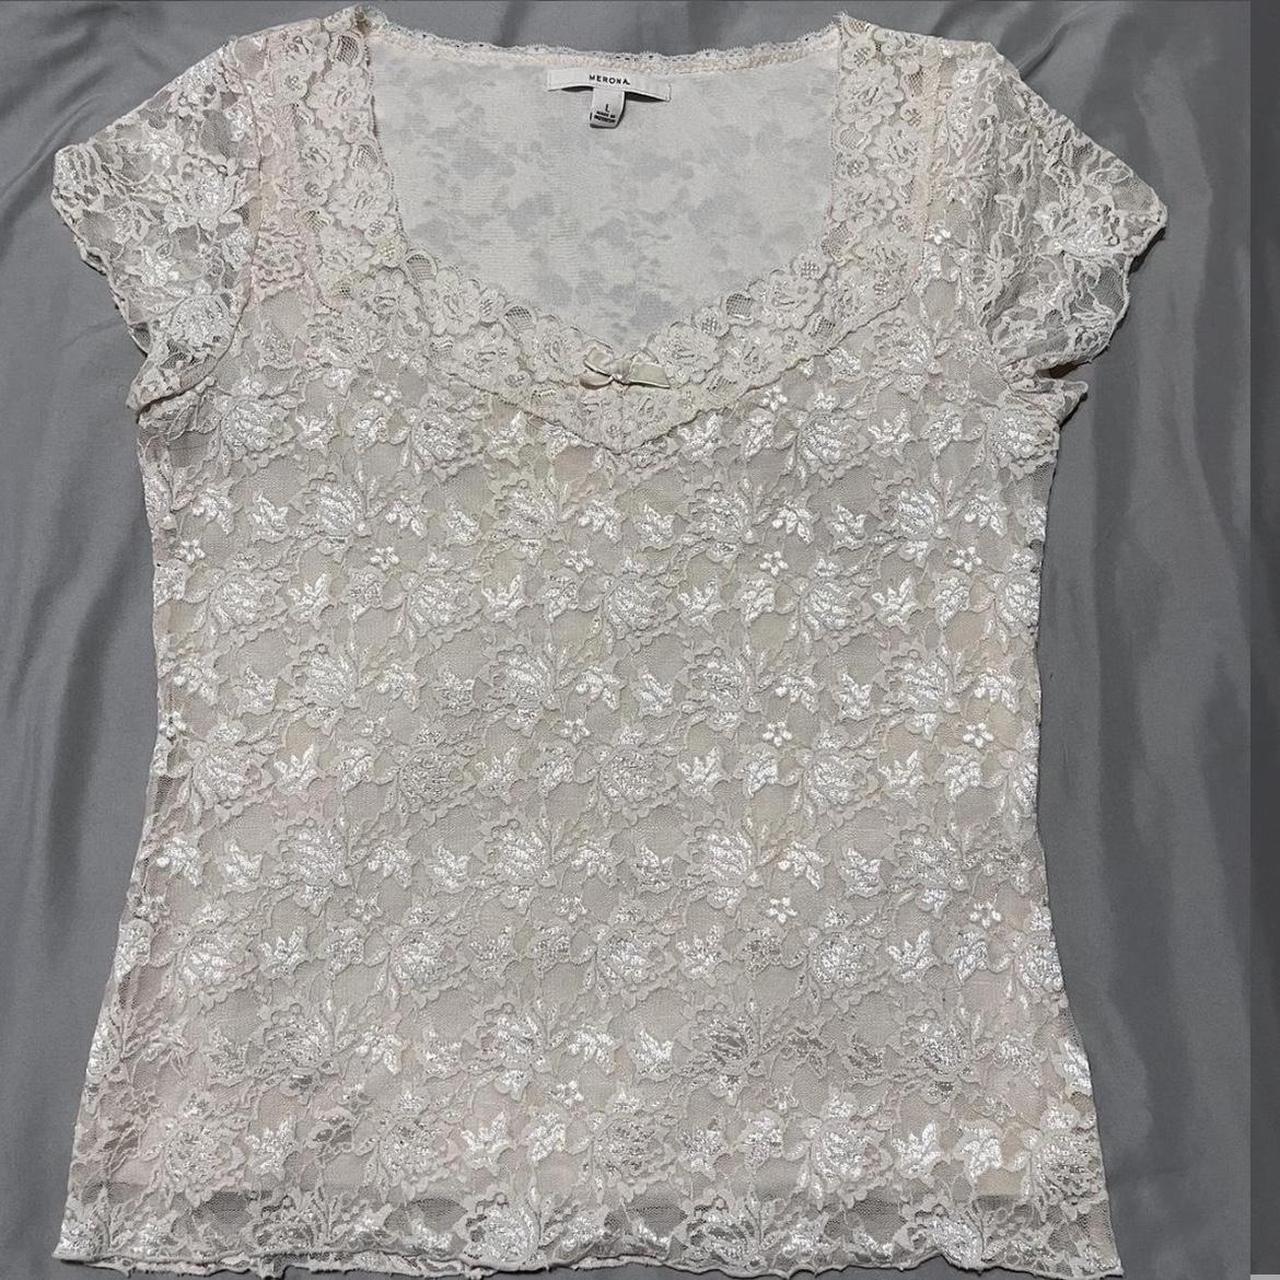 coquette white lace top zoomed in on smaller... - Depop